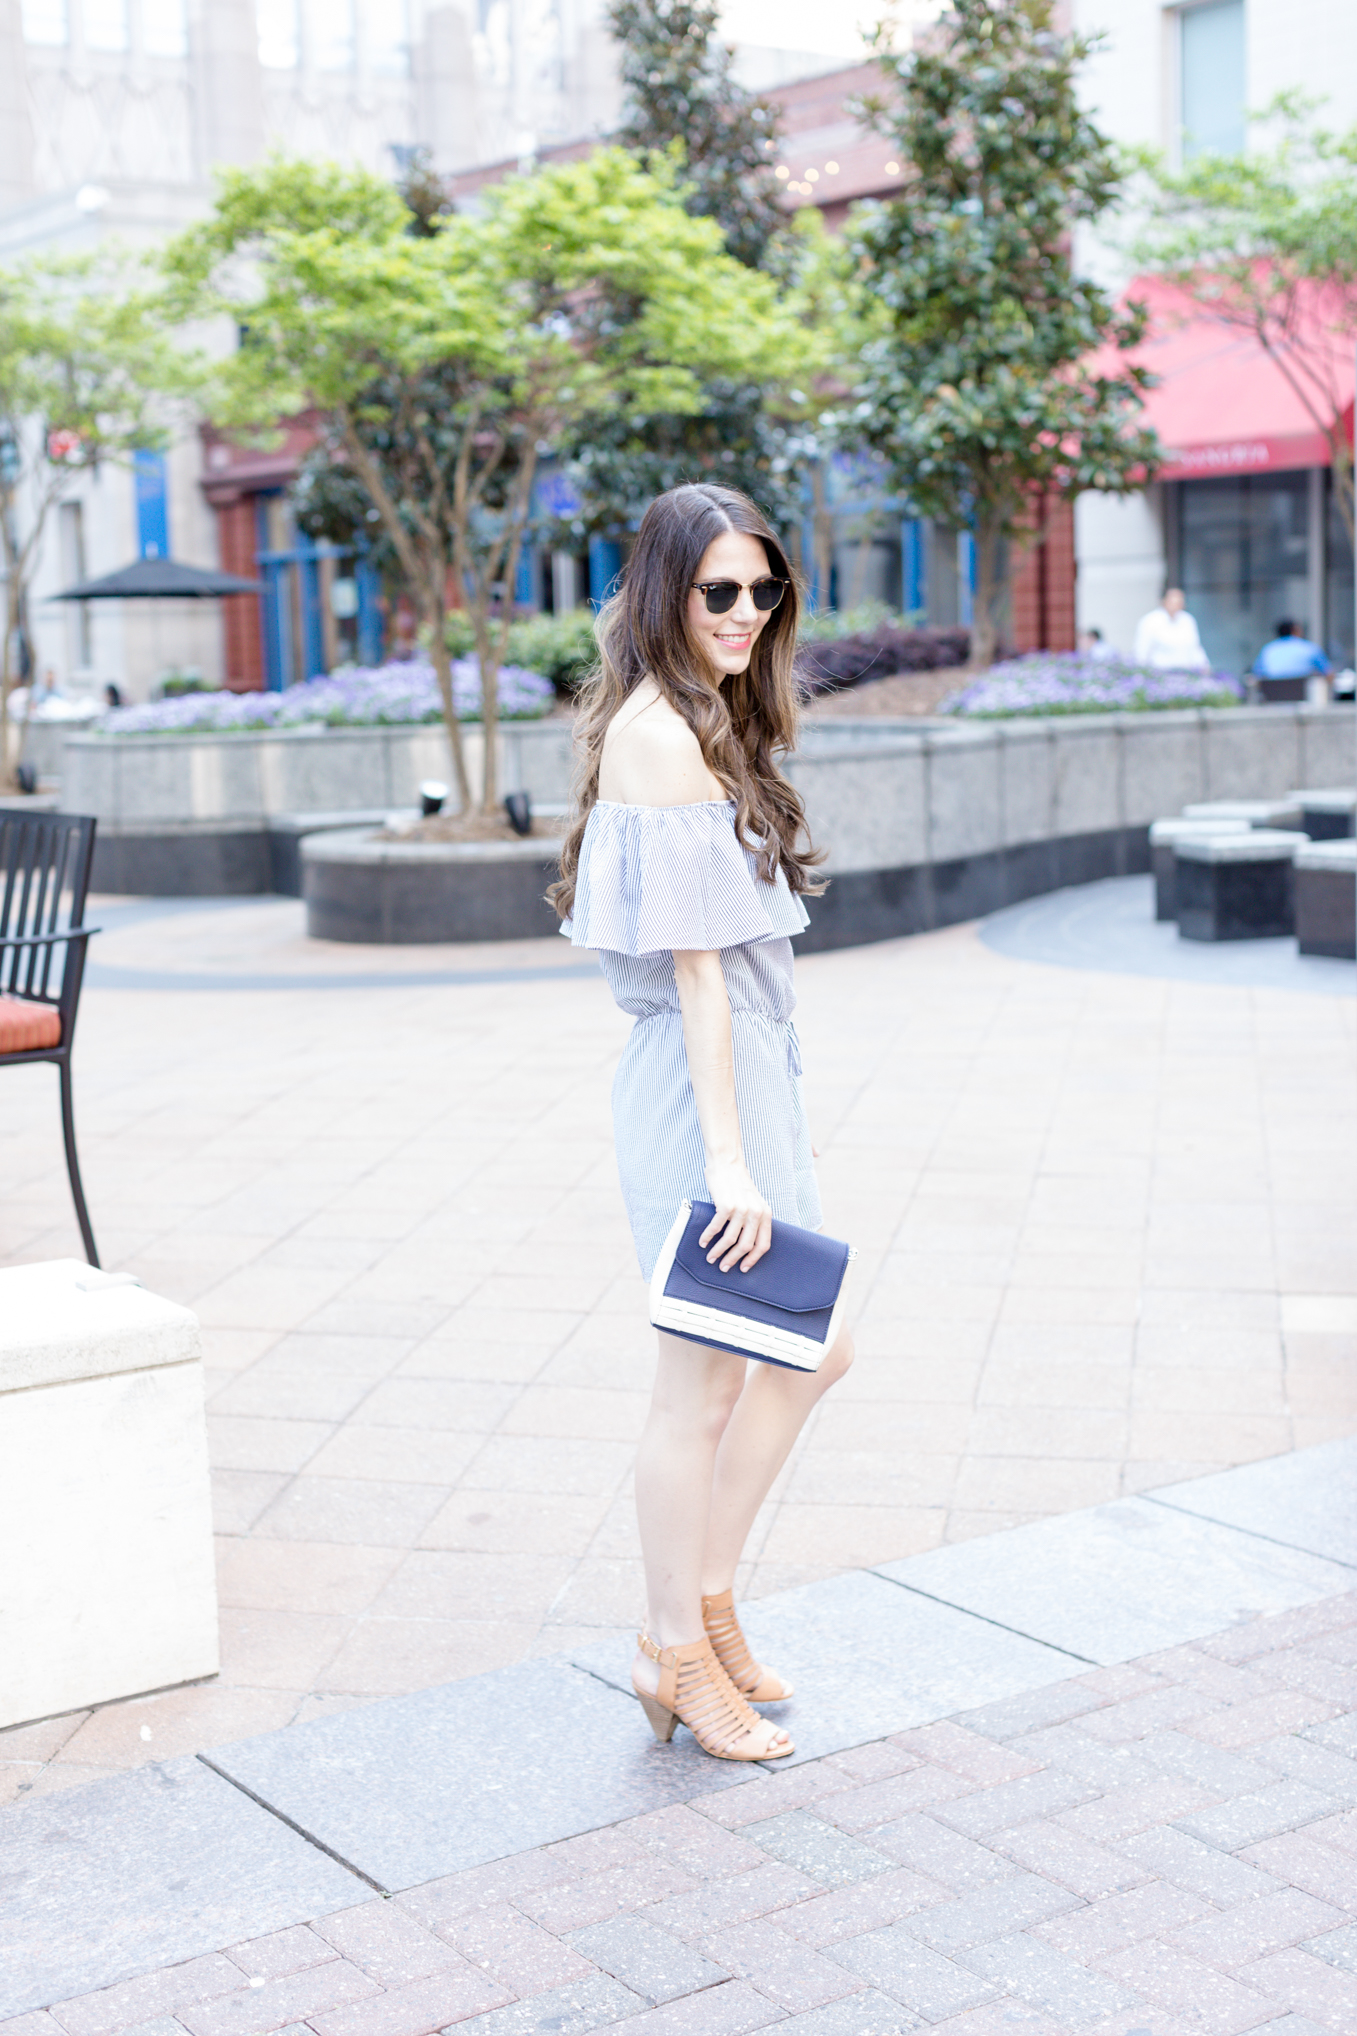 Ruffle Romper | Lifestyle blogger Elle Bowes shares a spring style inspiration.